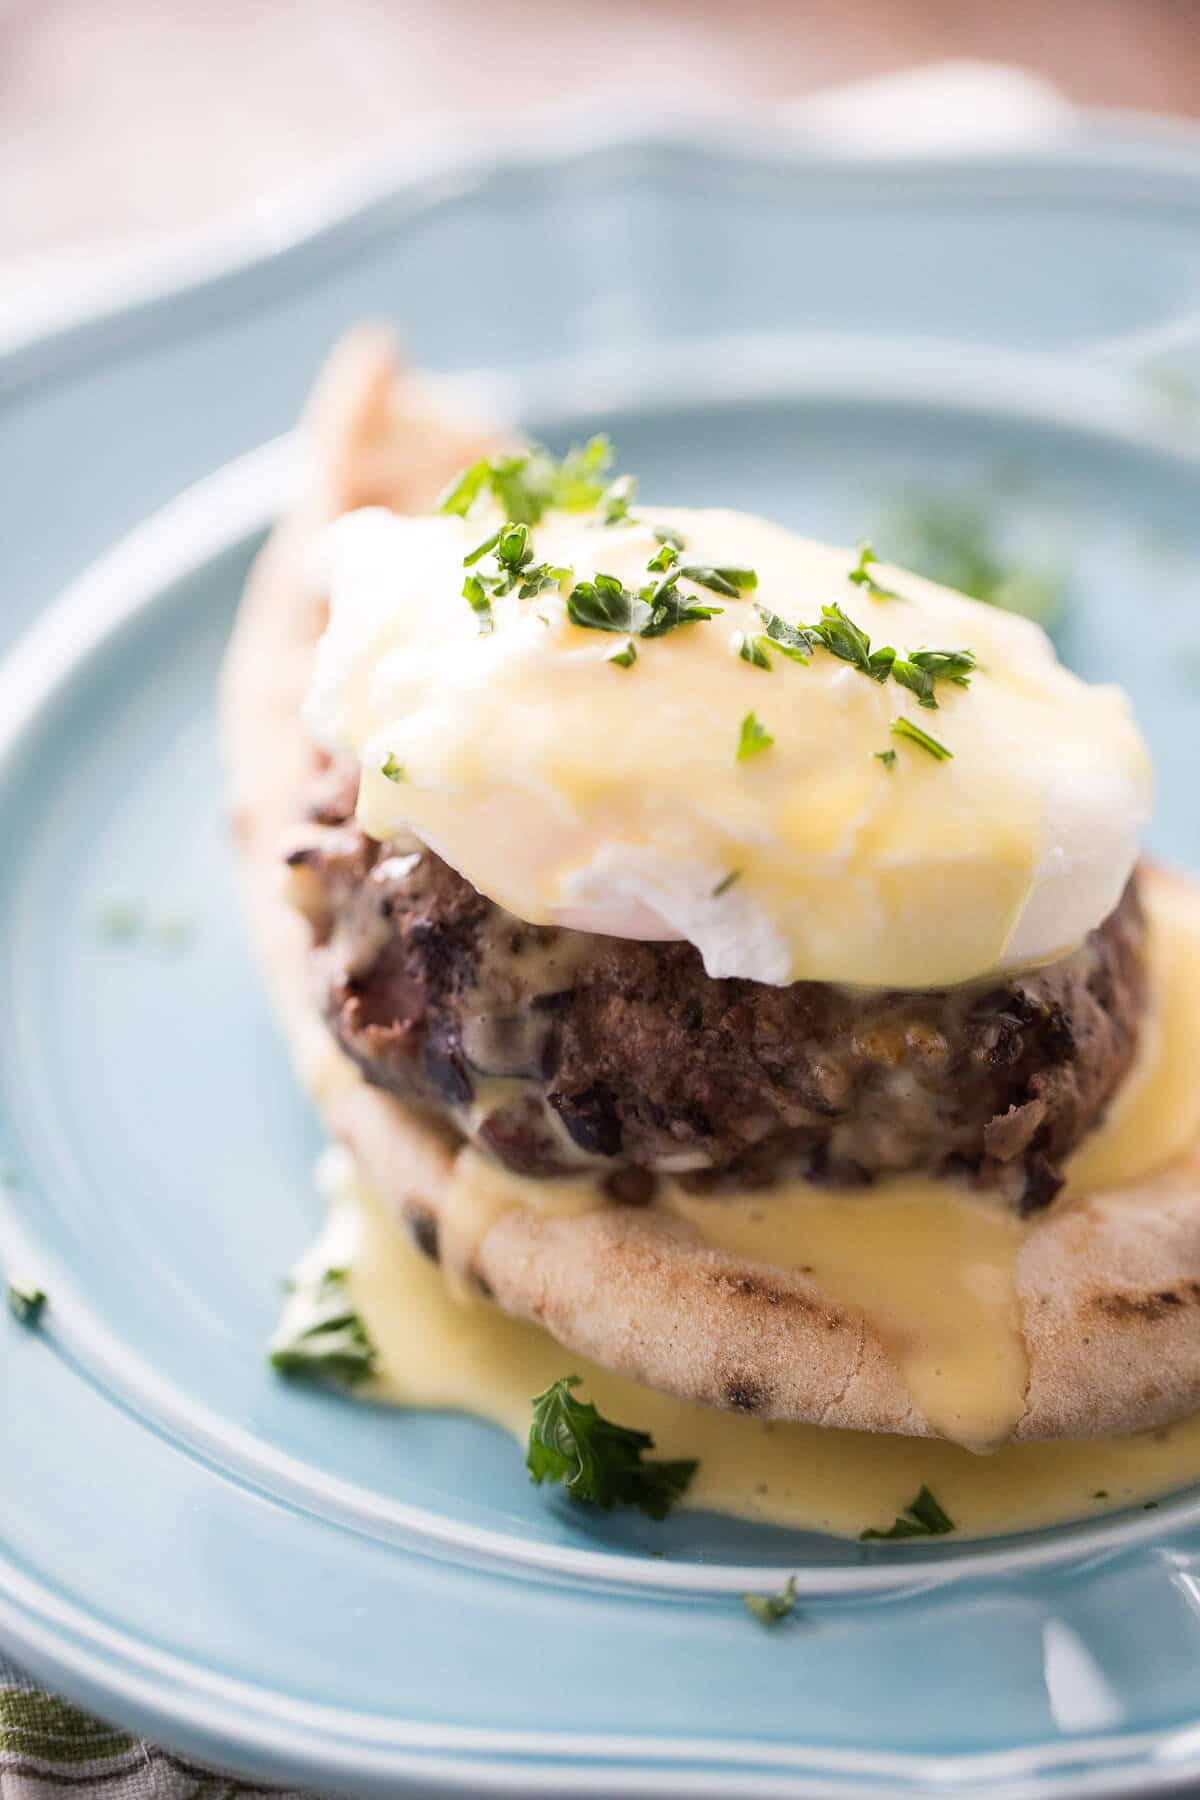 Greek flavored egg benedict with a simple blender hollandaise sauce!